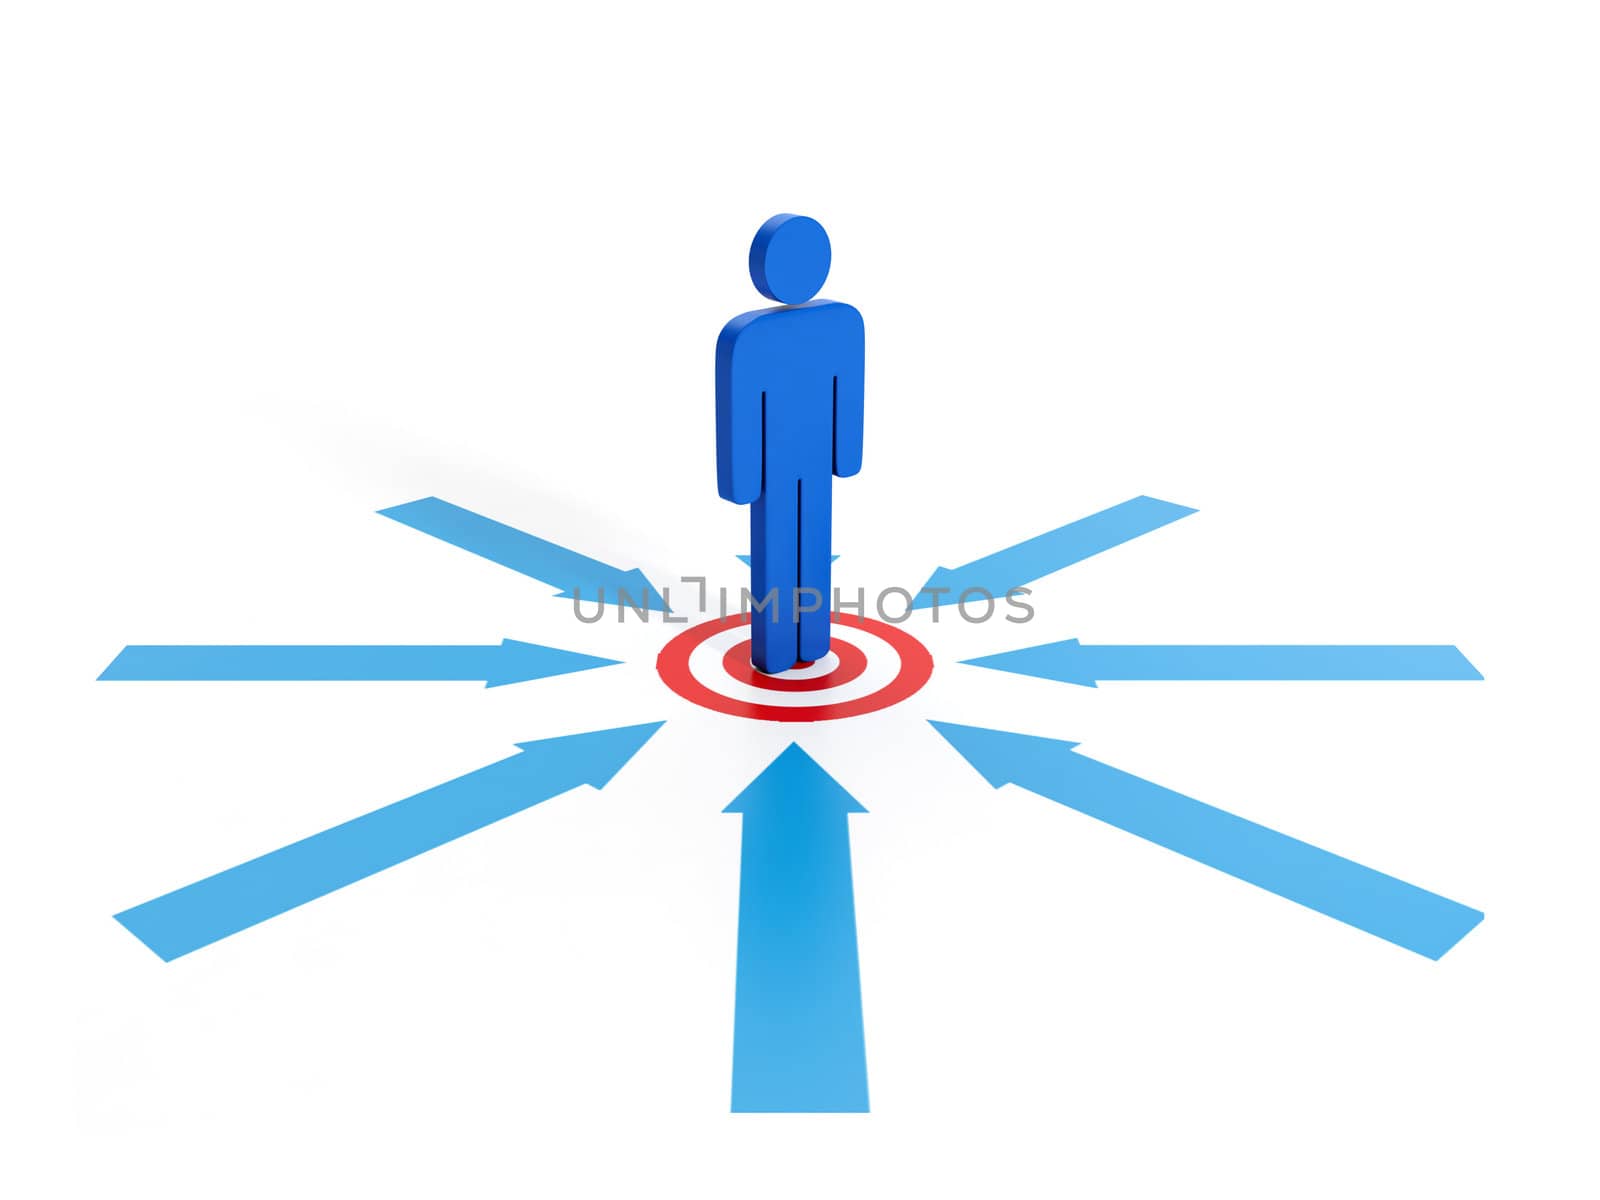 3d illustrations: Business concept. Competition for the goal. The red circle and a man